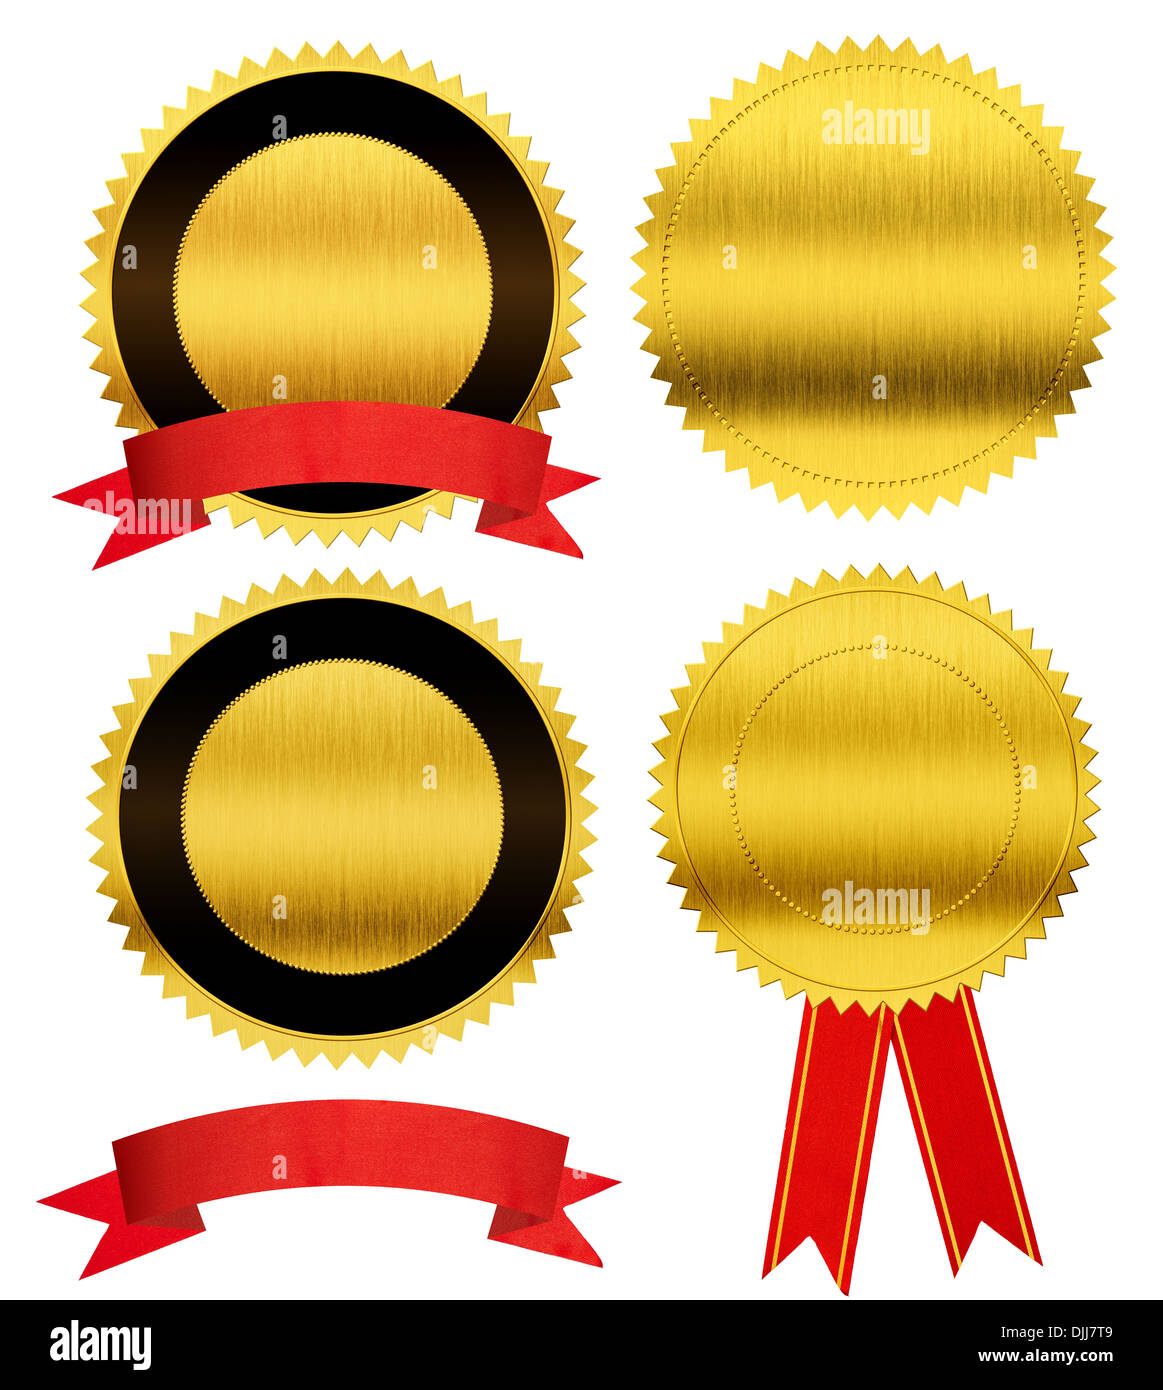 gold seal medals collection isolated Stock Photo